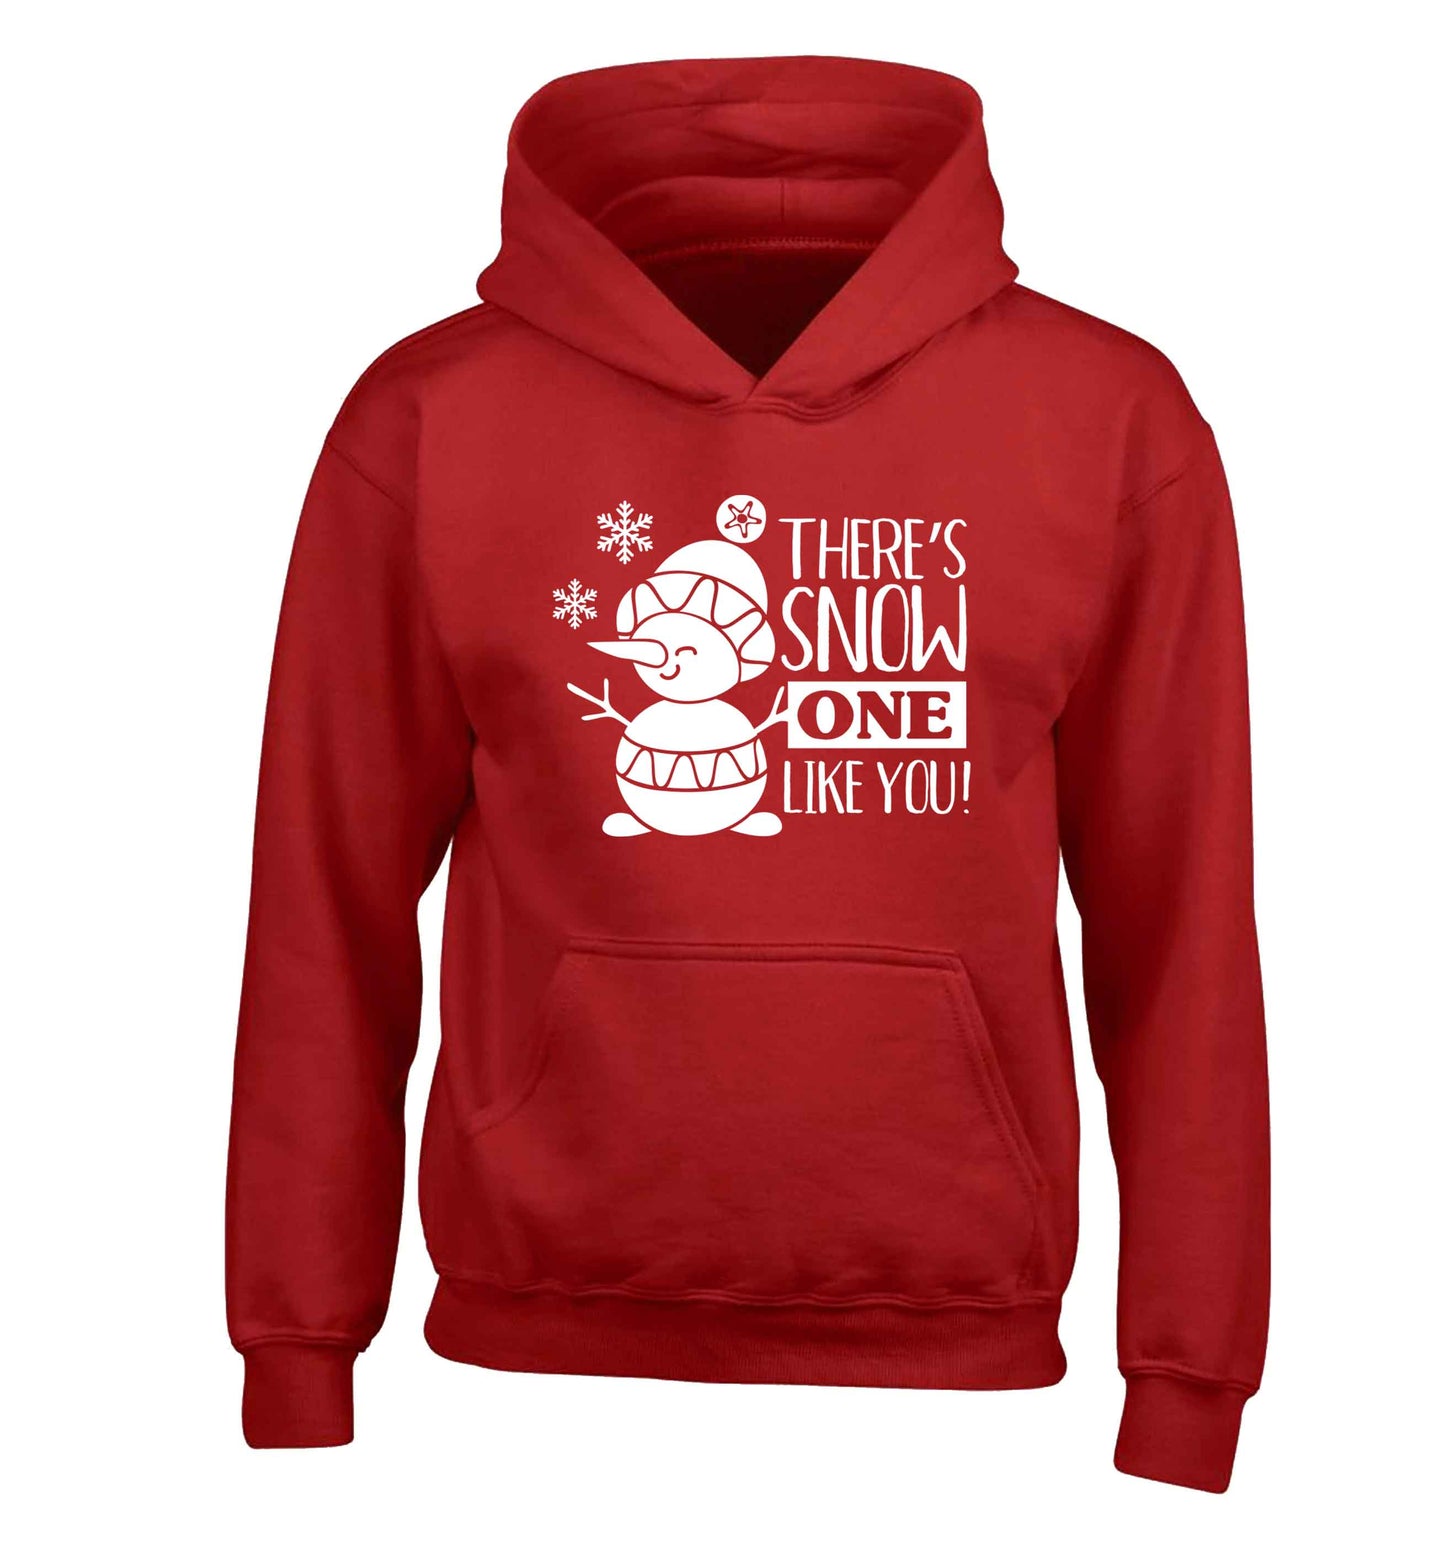 There's snow one like you children's red hoodie 12-13 Years